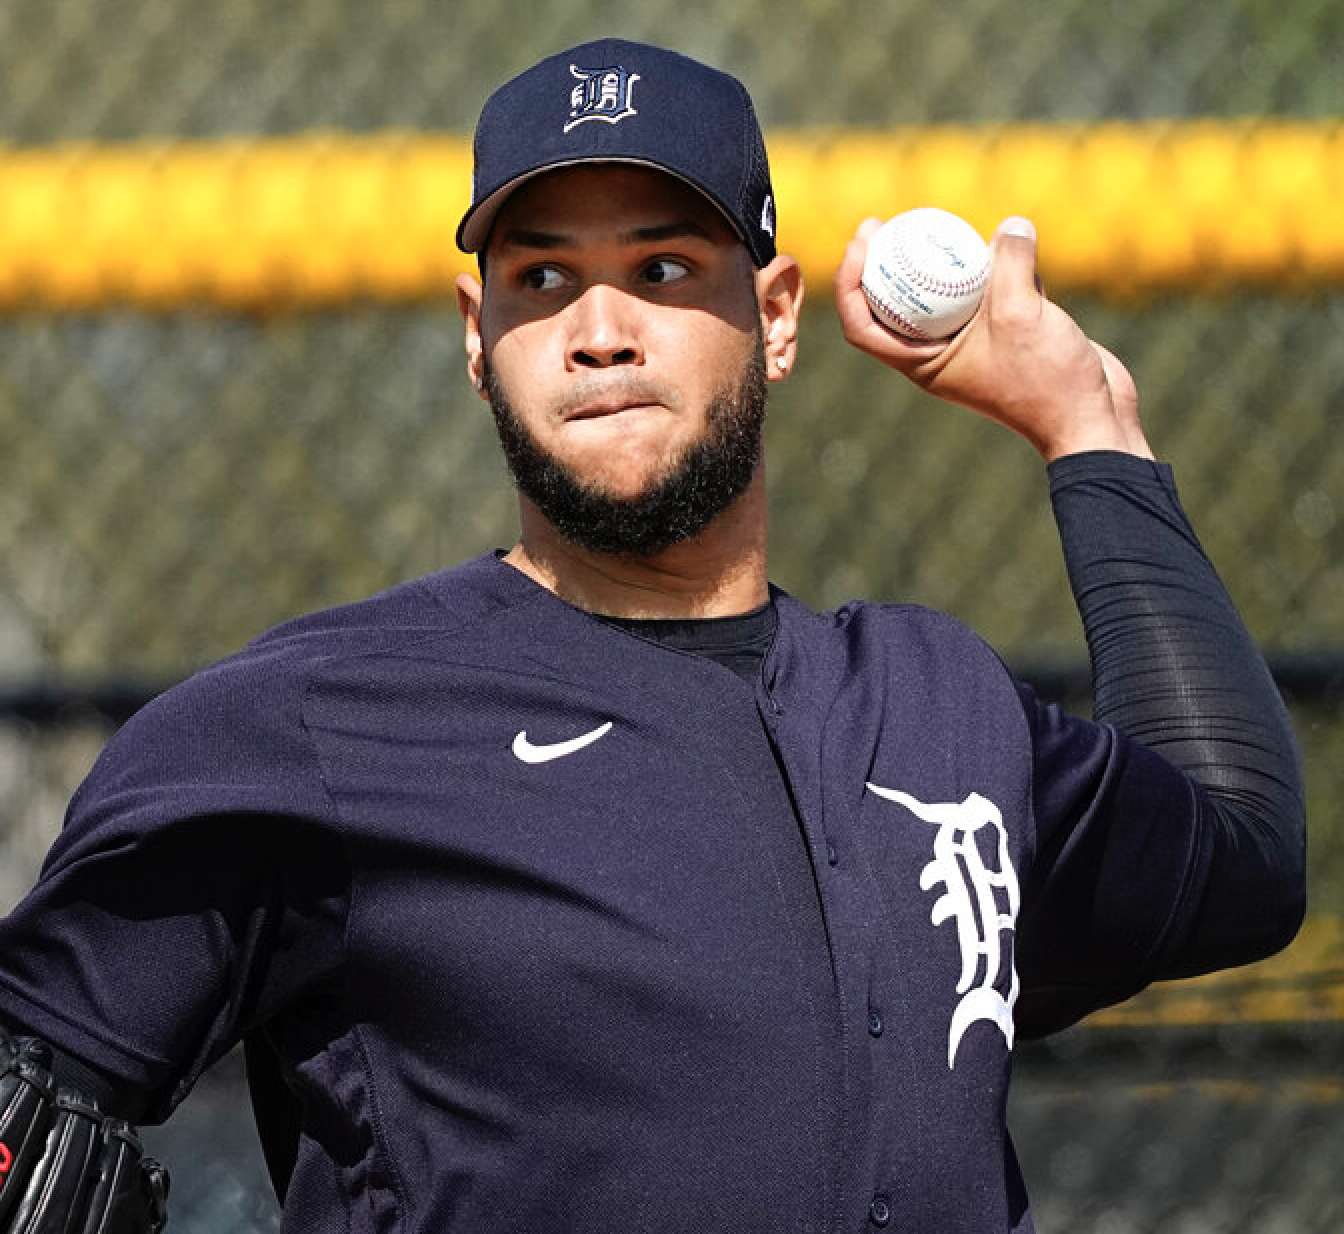 Tigers Today podcast: Previewing the 2023 season, and remembering Jerry Green